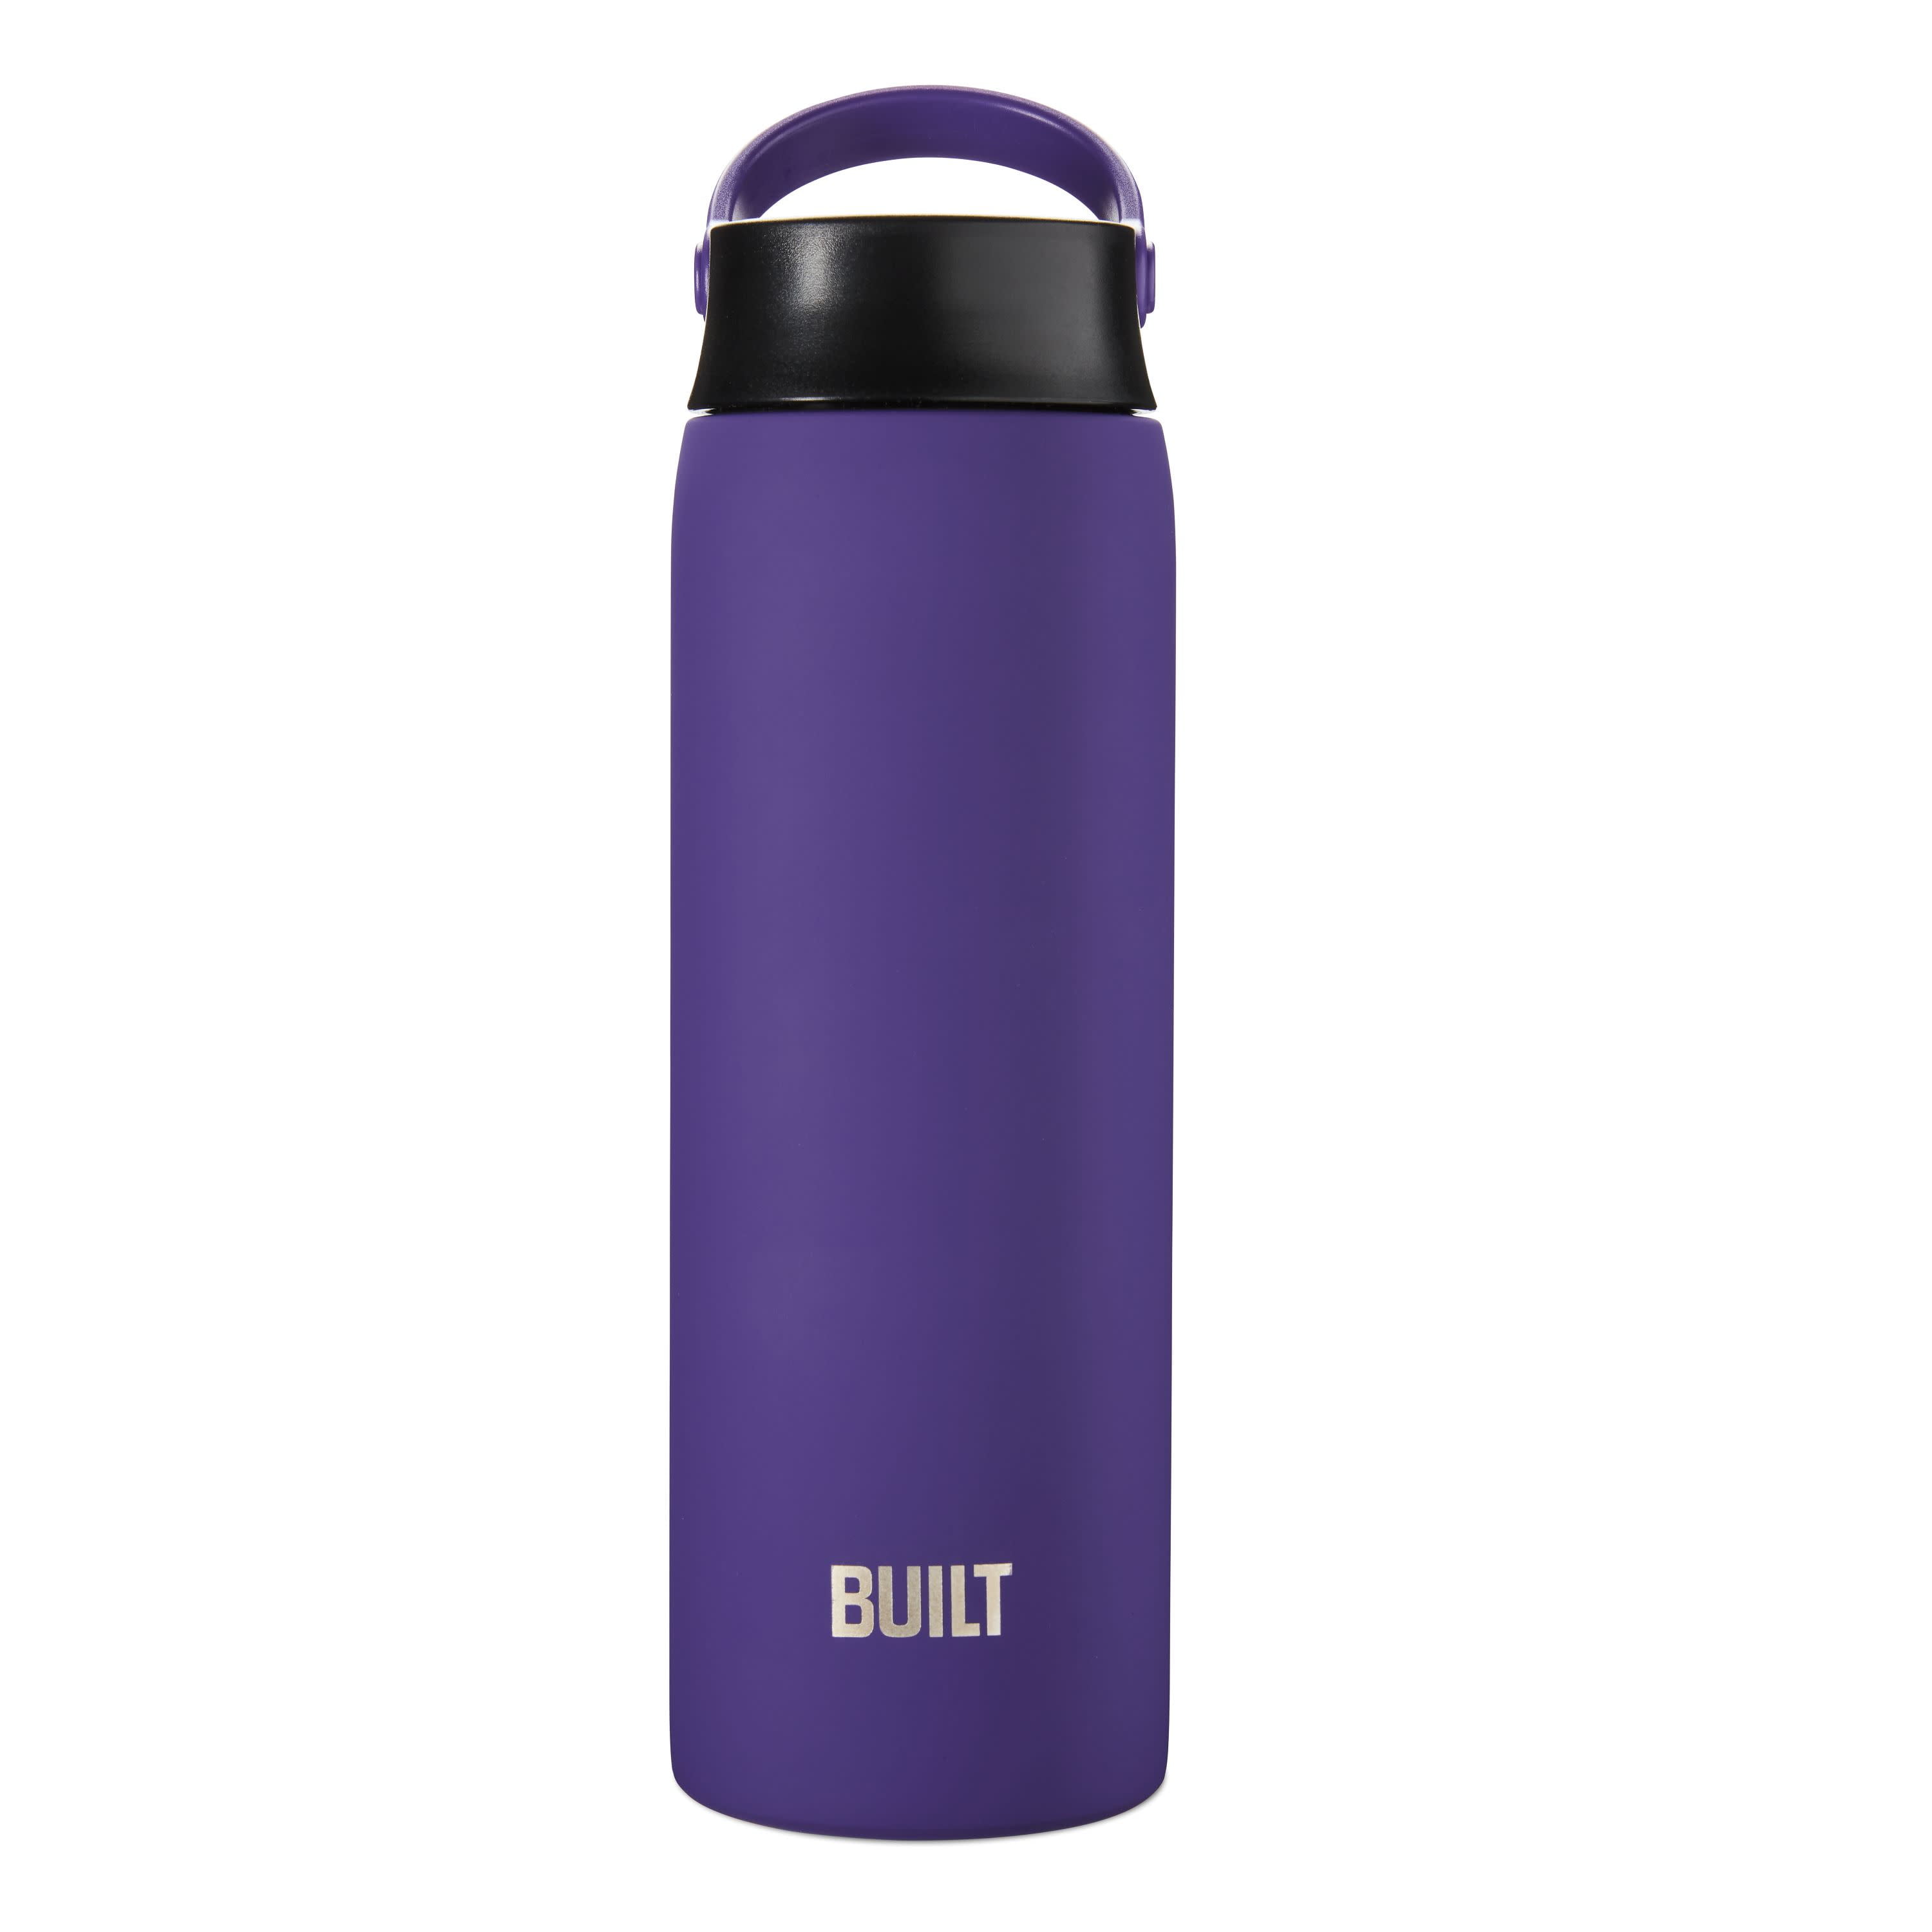 COOL GEAR Vacuum Insulated Stainless Steel Bottle Purple 20 FL OZ 20 oz hot cold